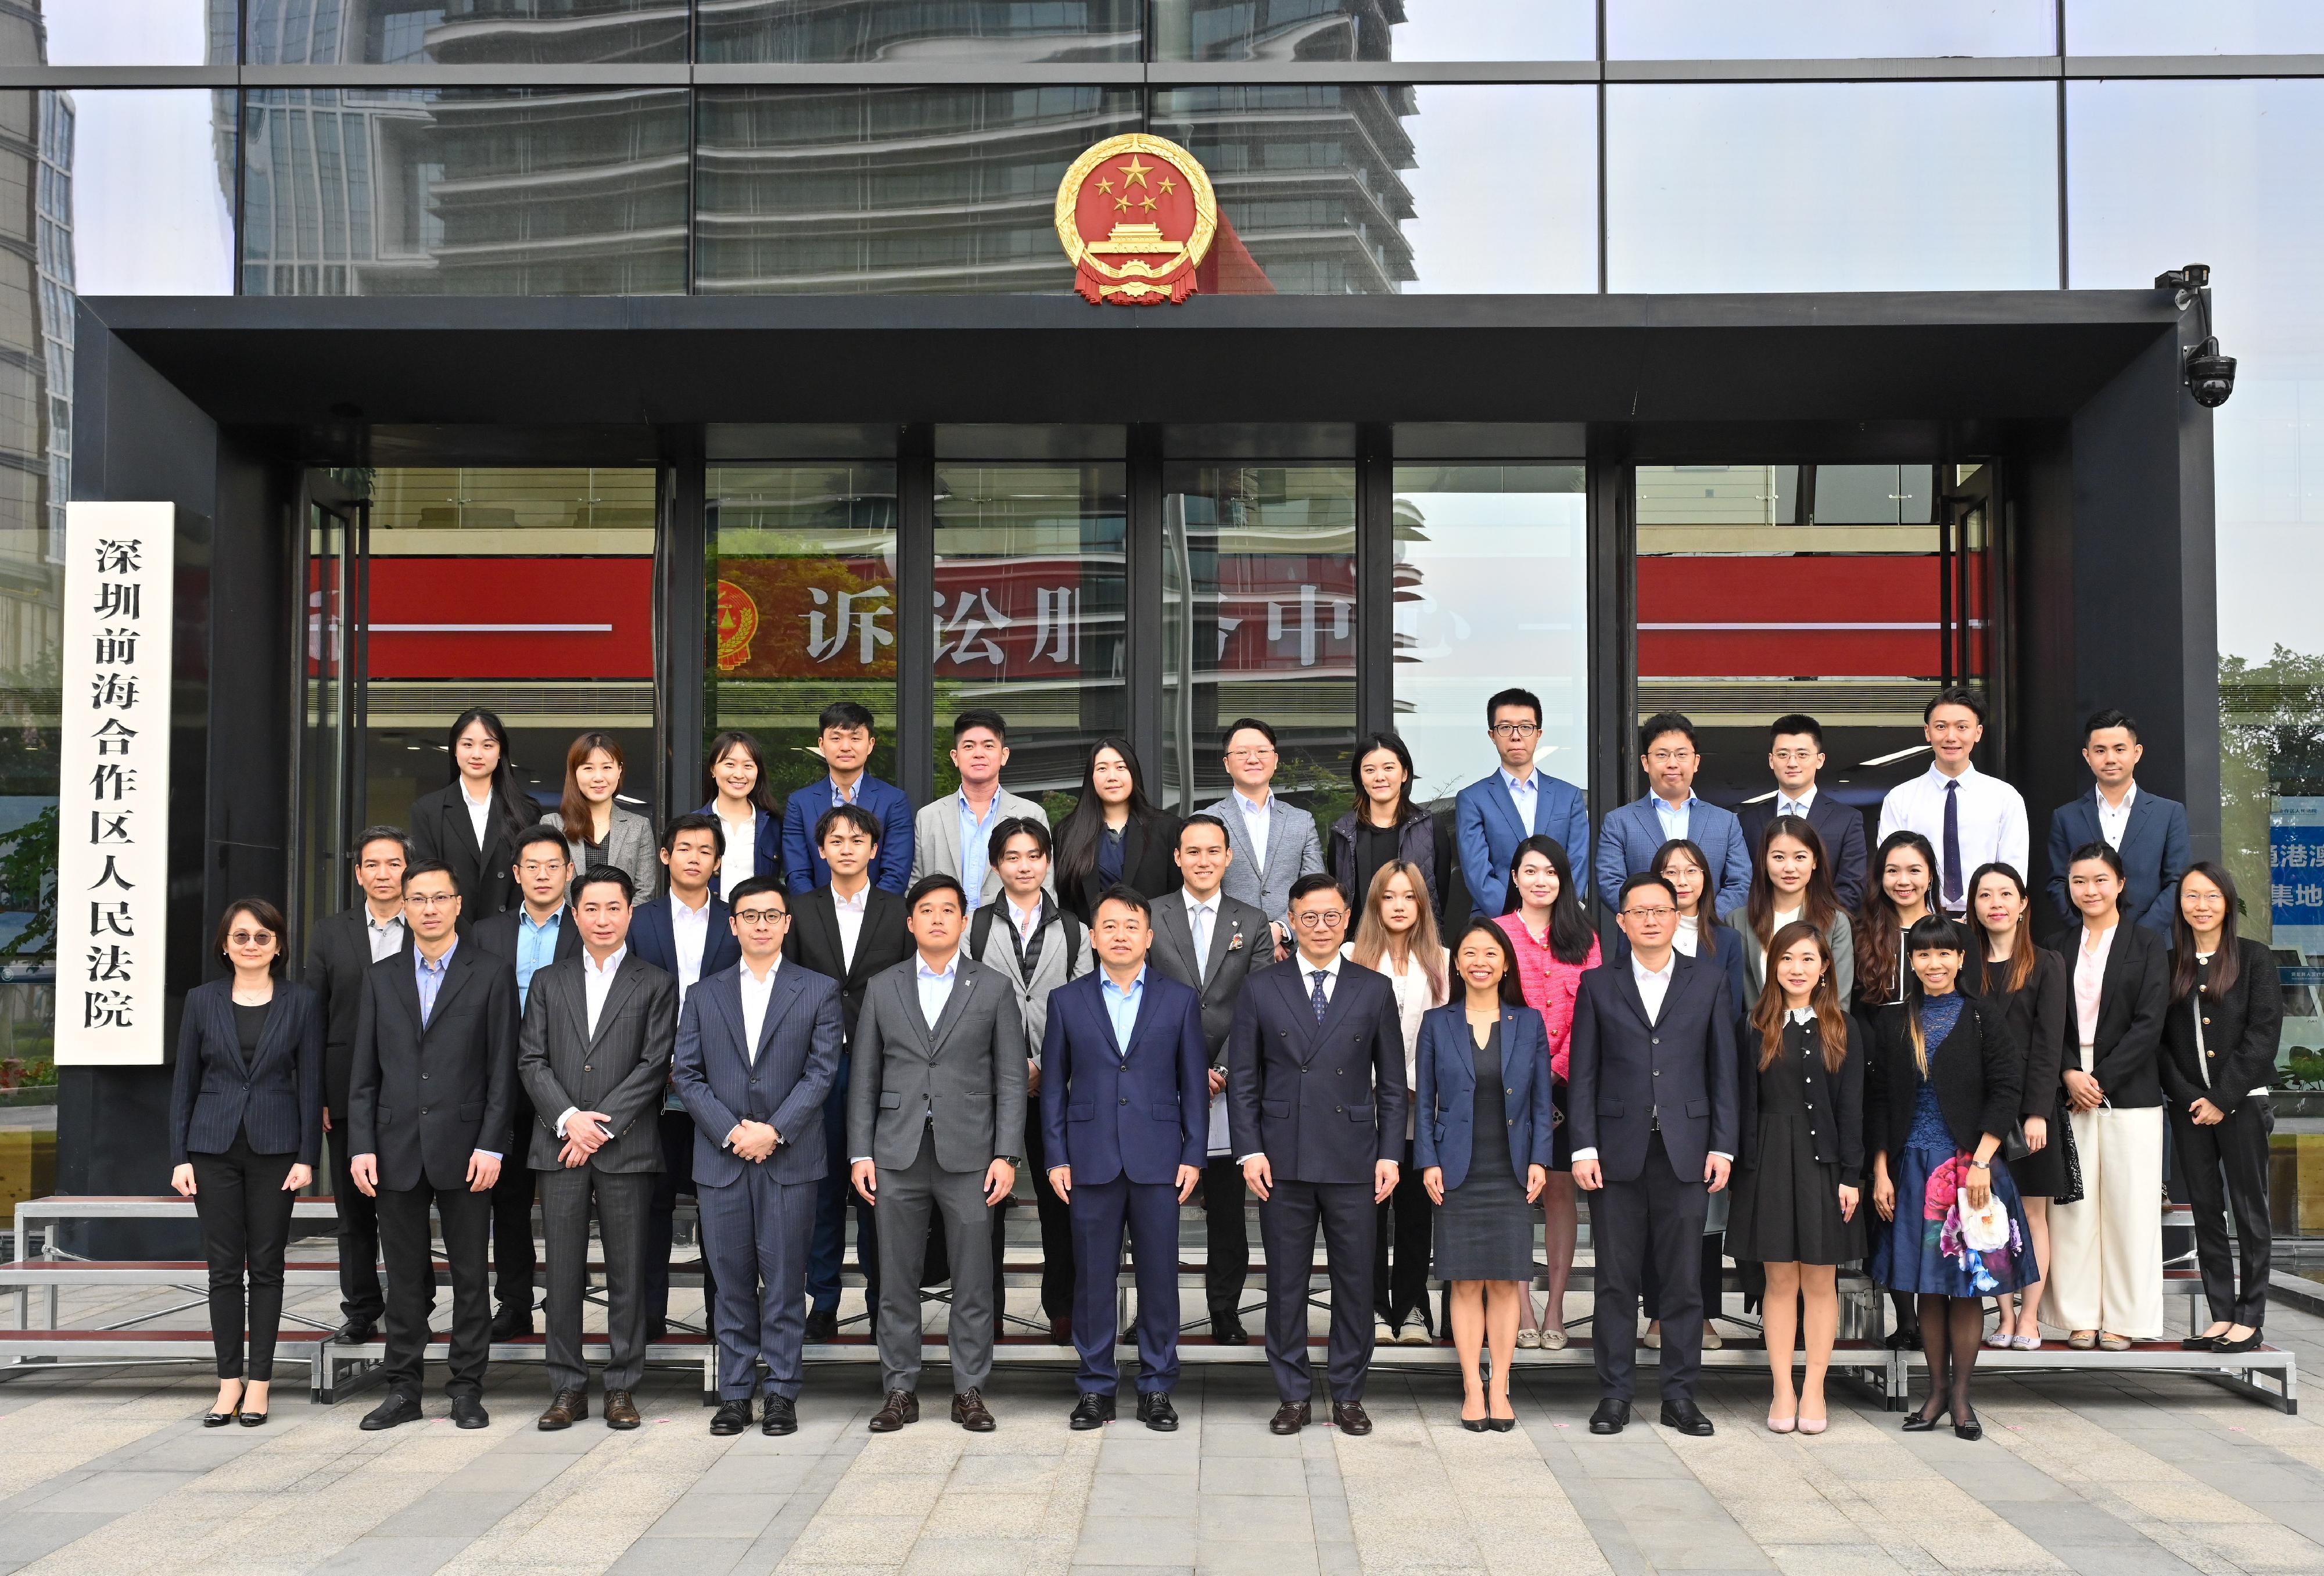 The Deputy Secretary for Justice, Mr Cheung Kwok-kwan, and a delegation of young lawyers led by him today (November 17) finished the first stop, Shenzhen, of their visit to Mainland cities of the Greater Bay Area. Photo shows Mr Cheung (front row, fifth right) with the President of the Shenzhen Qianhai Cooperation Zone People's Court (Qianhai Court), Mr Bian Fei (first row, centre), and the delegation during the visit to the Qianhai Court in Shenzhen.